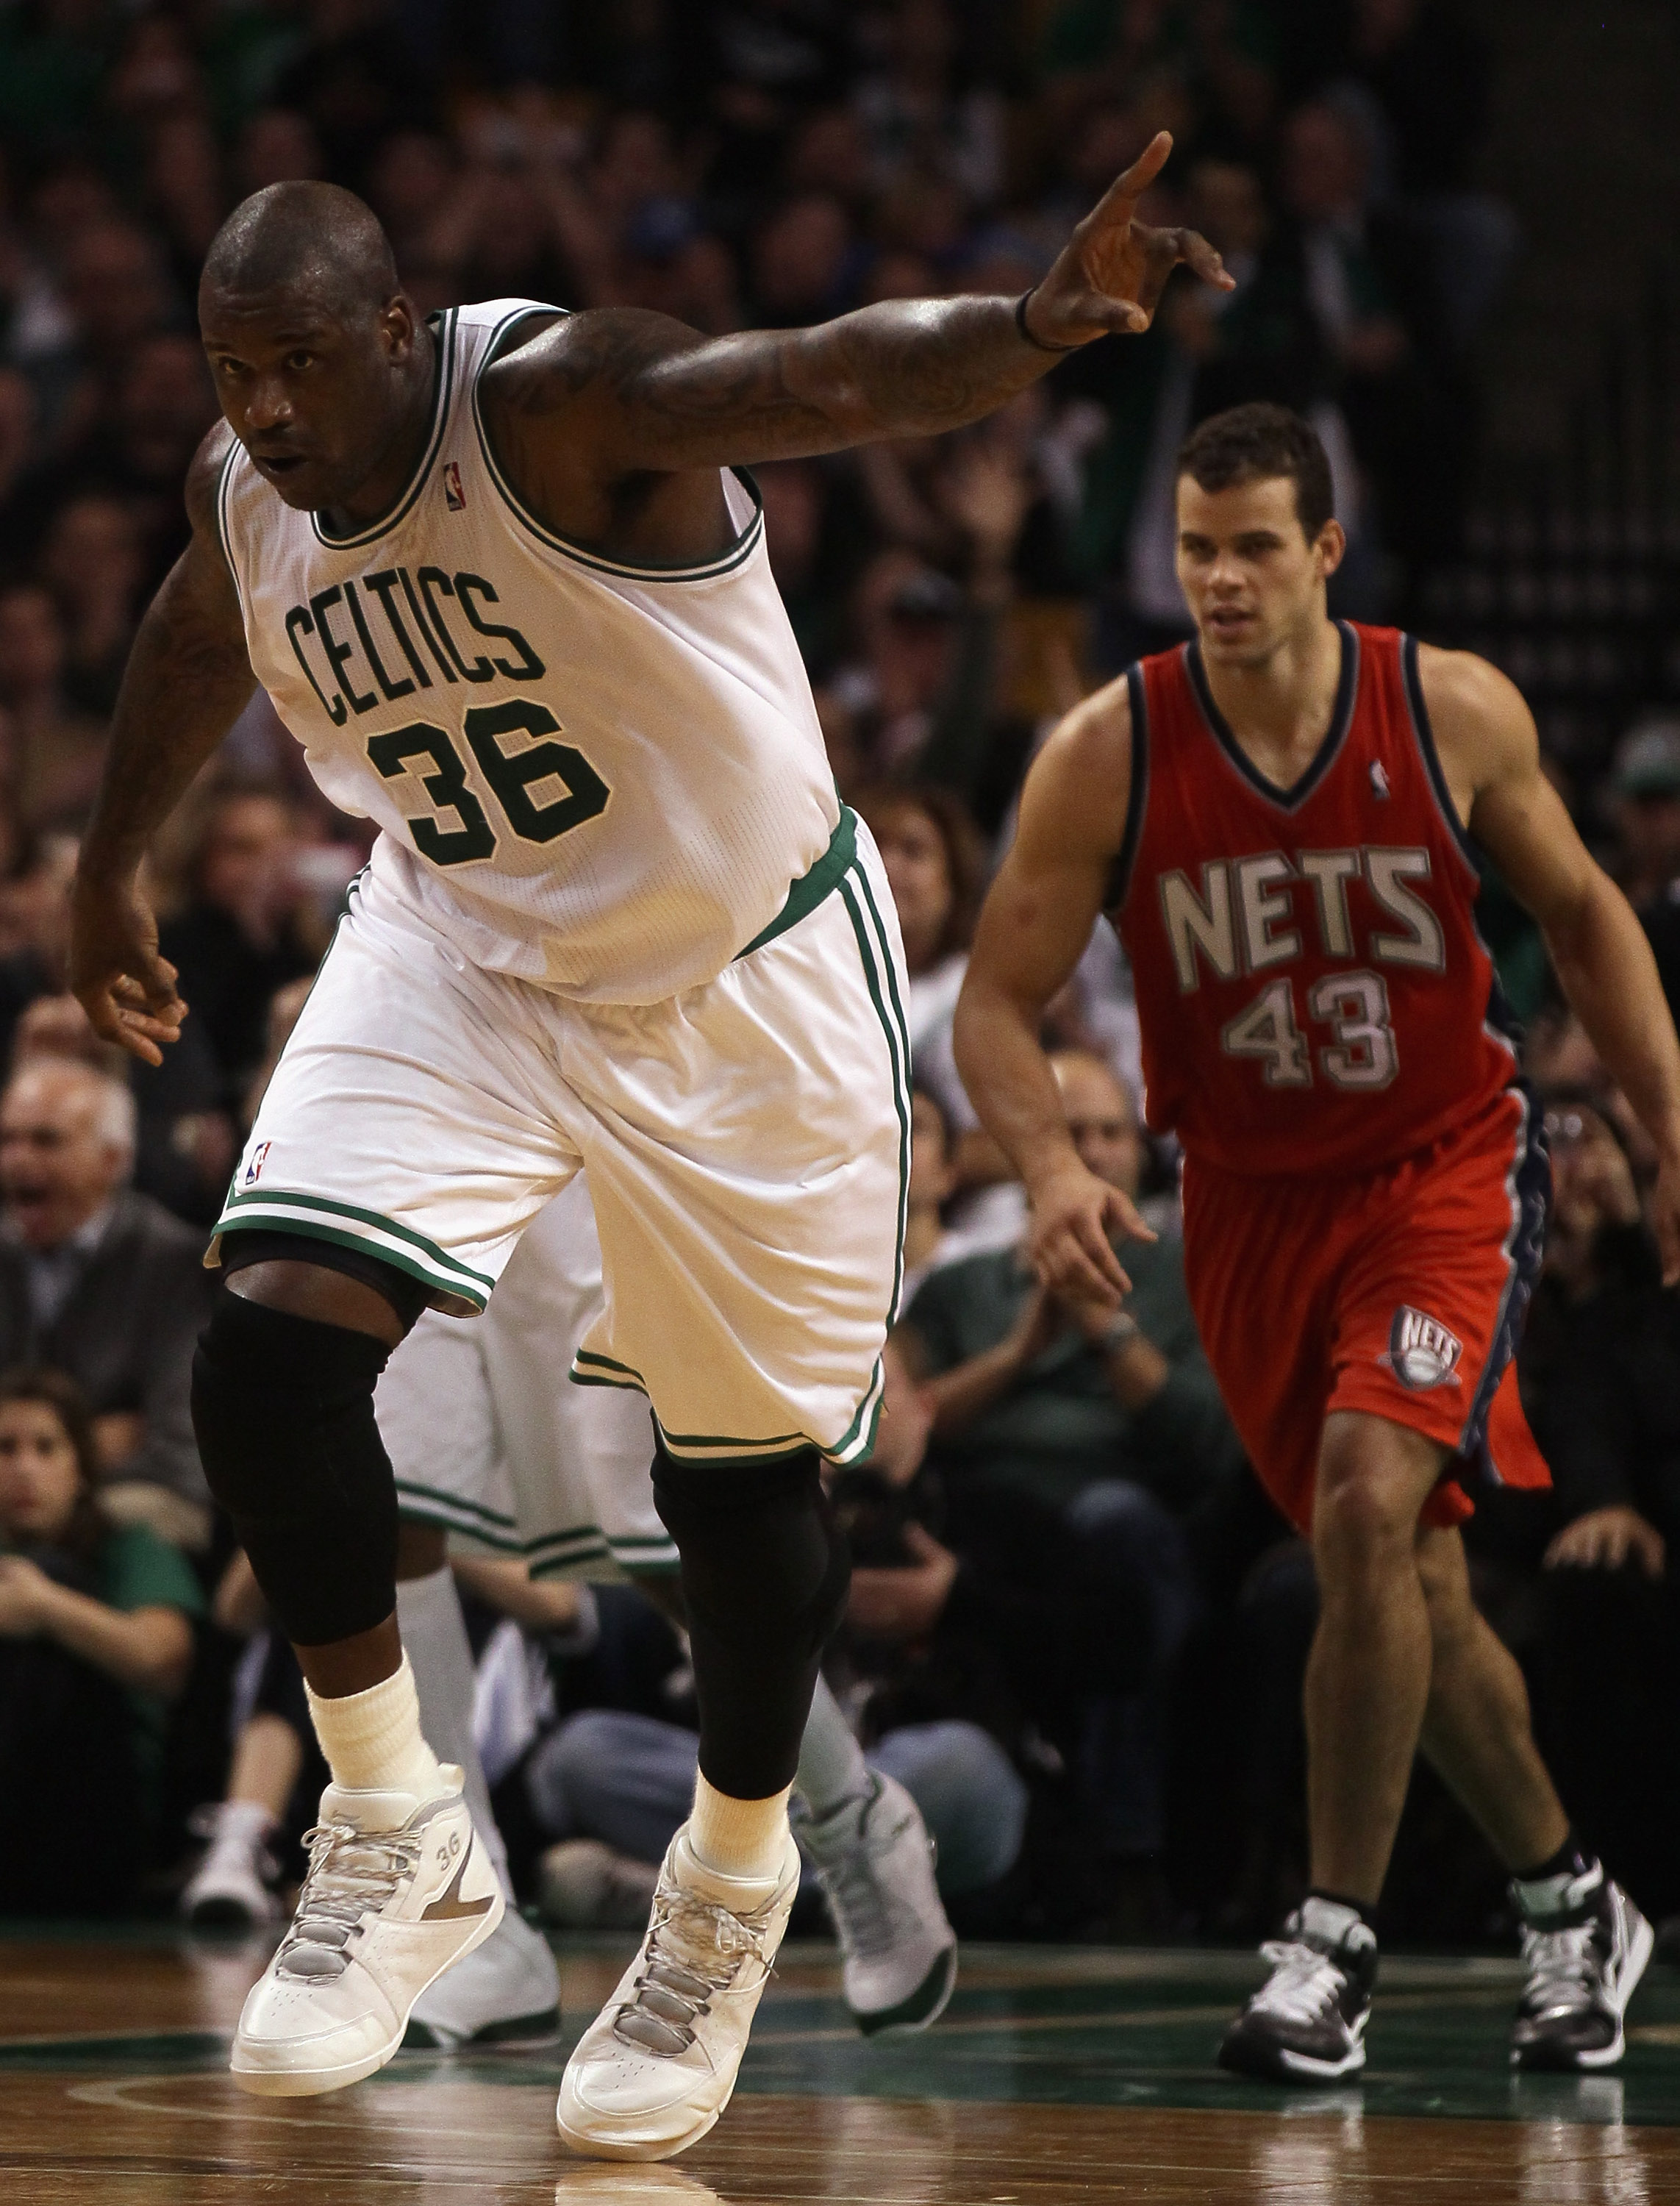 BOSTON - NOVEMBER 24:  Shaquille O'Neal #36 of the Boston Celtics celebrates his basket in the fourth quarter against the New Jersey Nets on November 24, 2010 at the TD Garden in Boston, Massachusetts. The Celtics defeated the nets 89-83. NOTE TO USER: Us